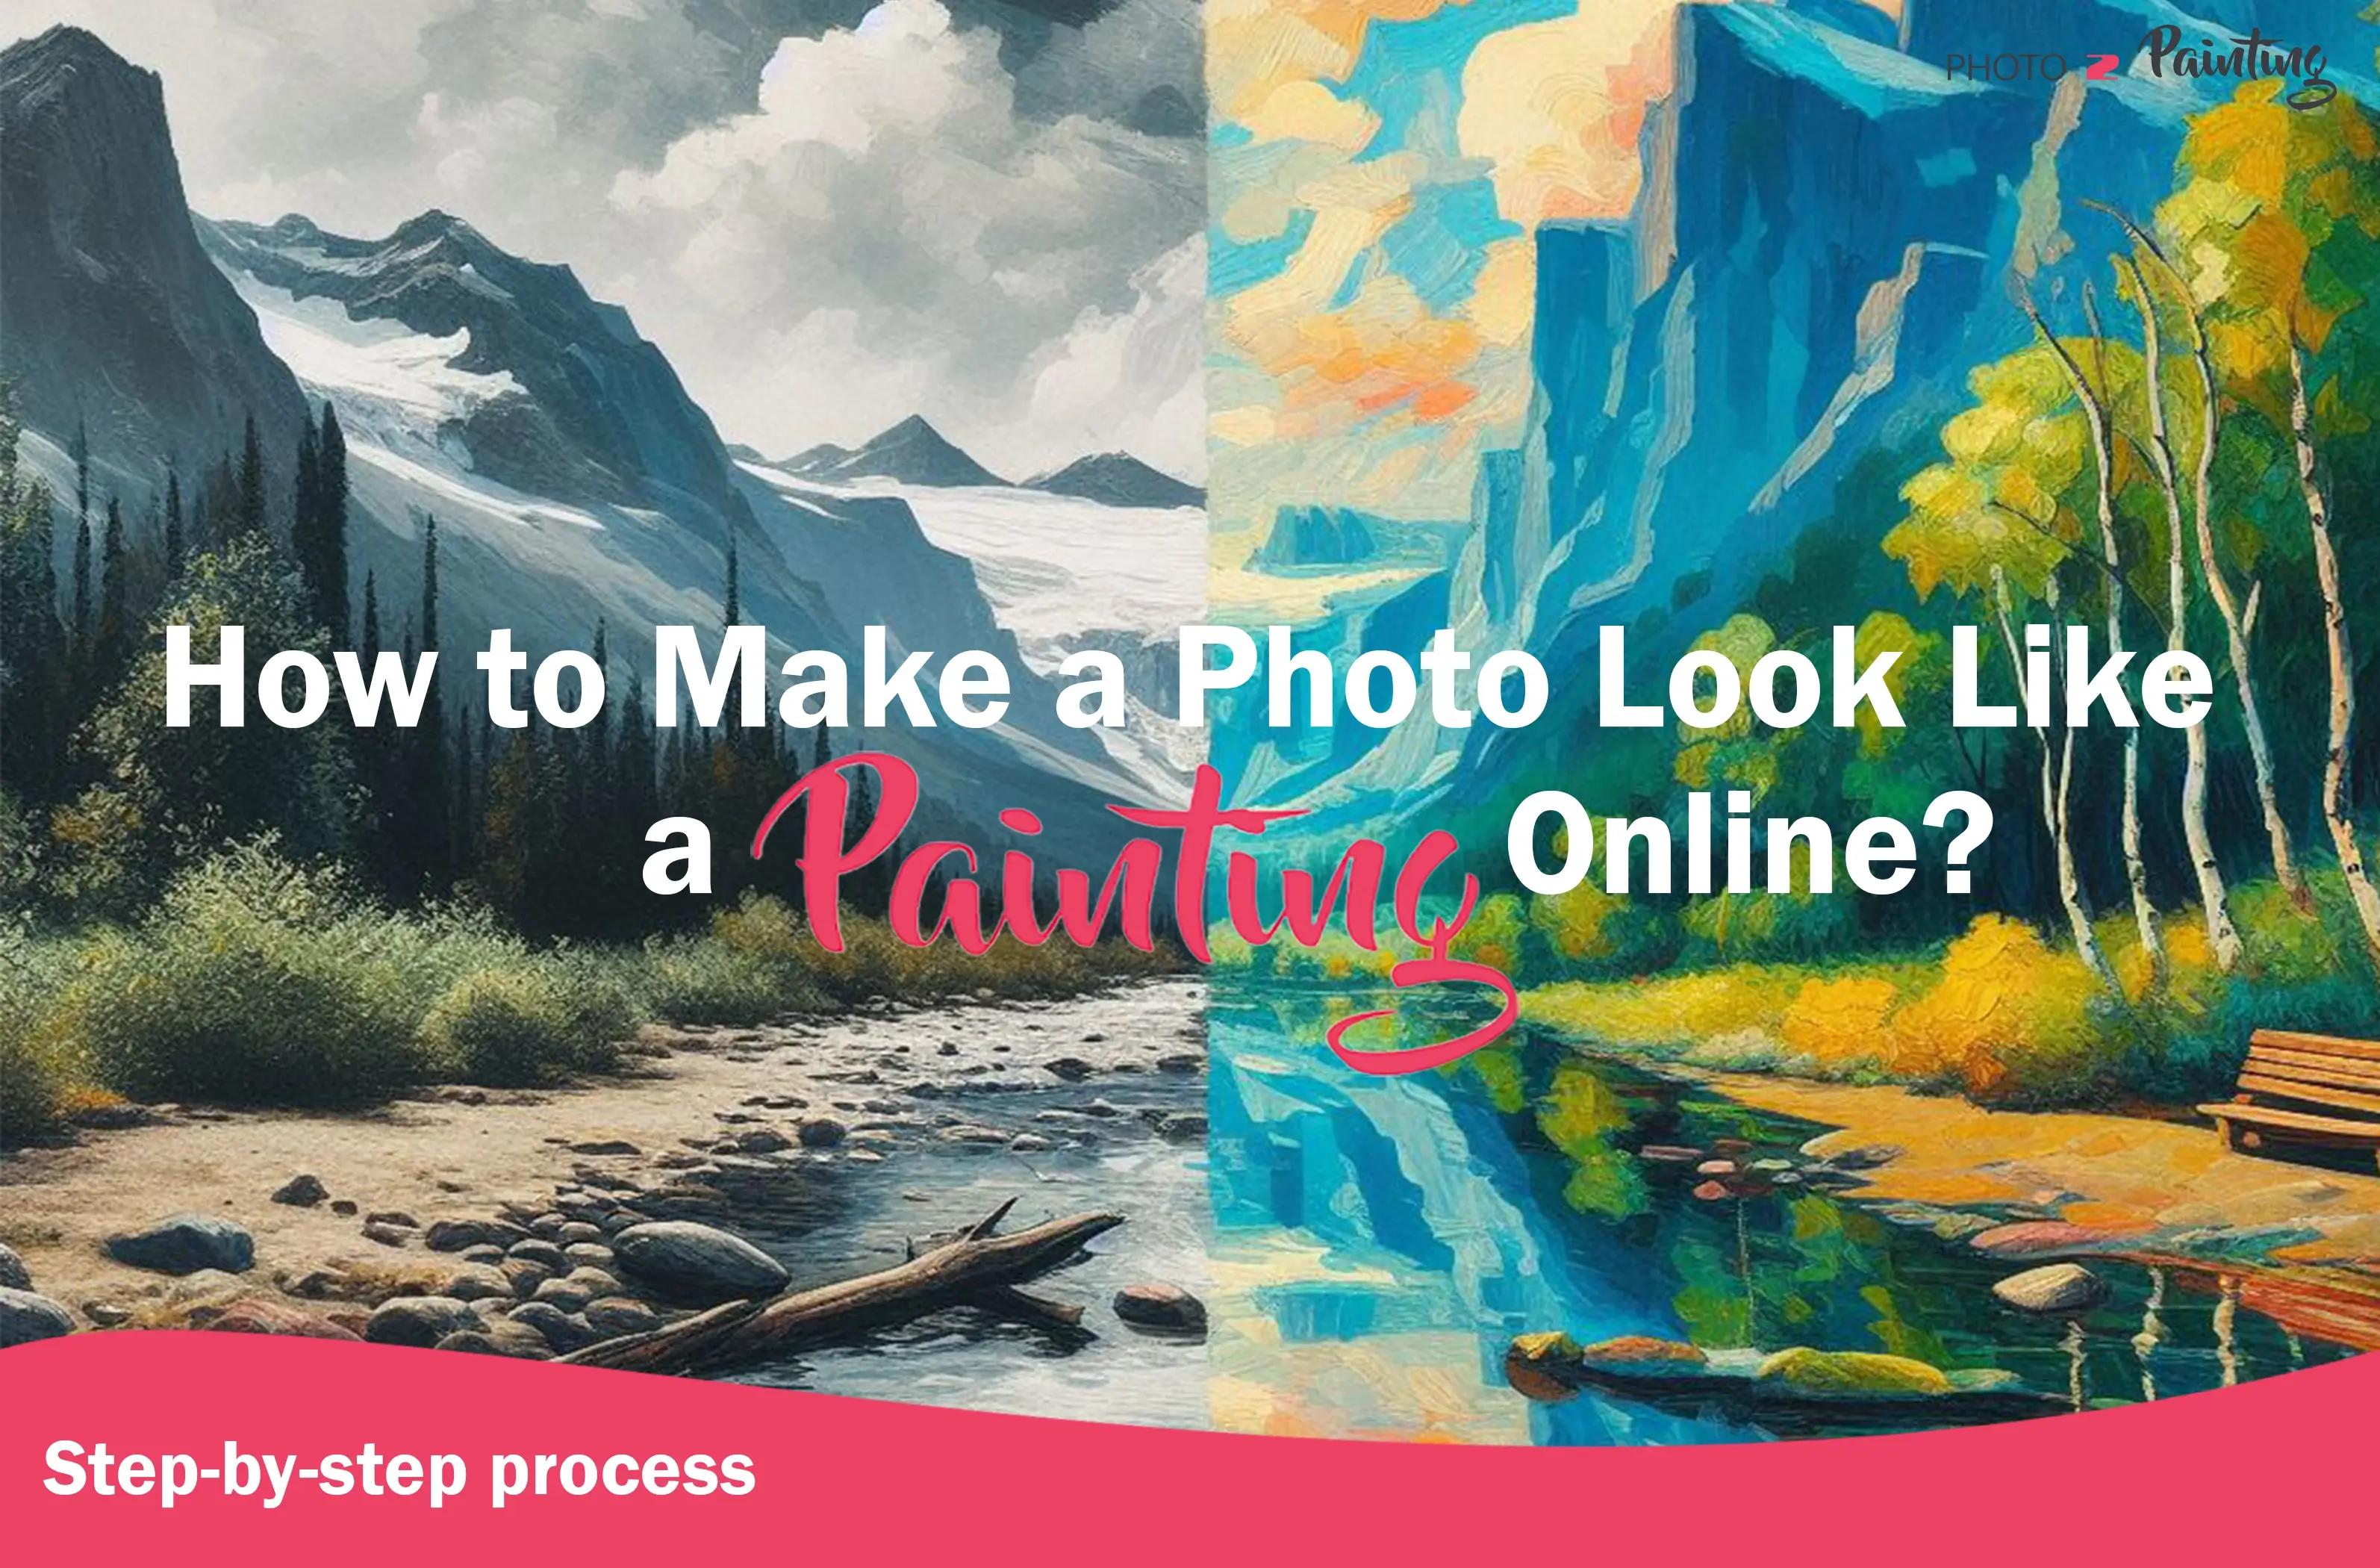 How To Make A Photo Look Like A Painting Online?